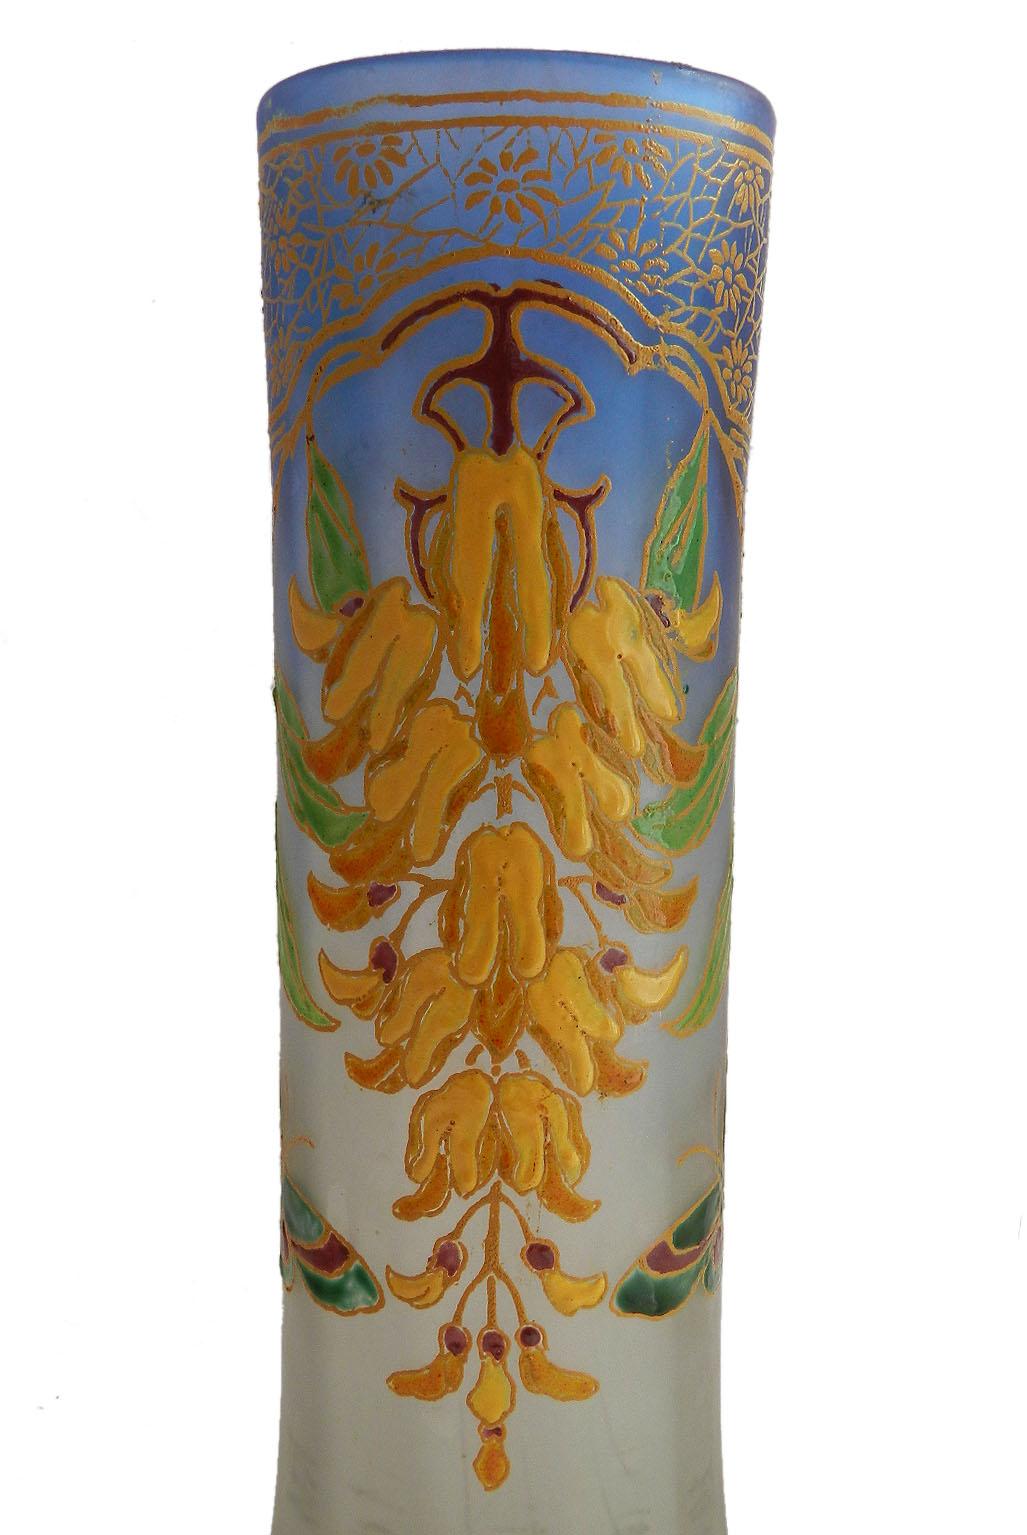 Pair of Art Nouveau Legras Vases Enameled pâte de verre Glass signed Leg for Legras, circa 1900
In good condition no cracks or chips, with only minor marks of age and use inside the vases not distracting.
 